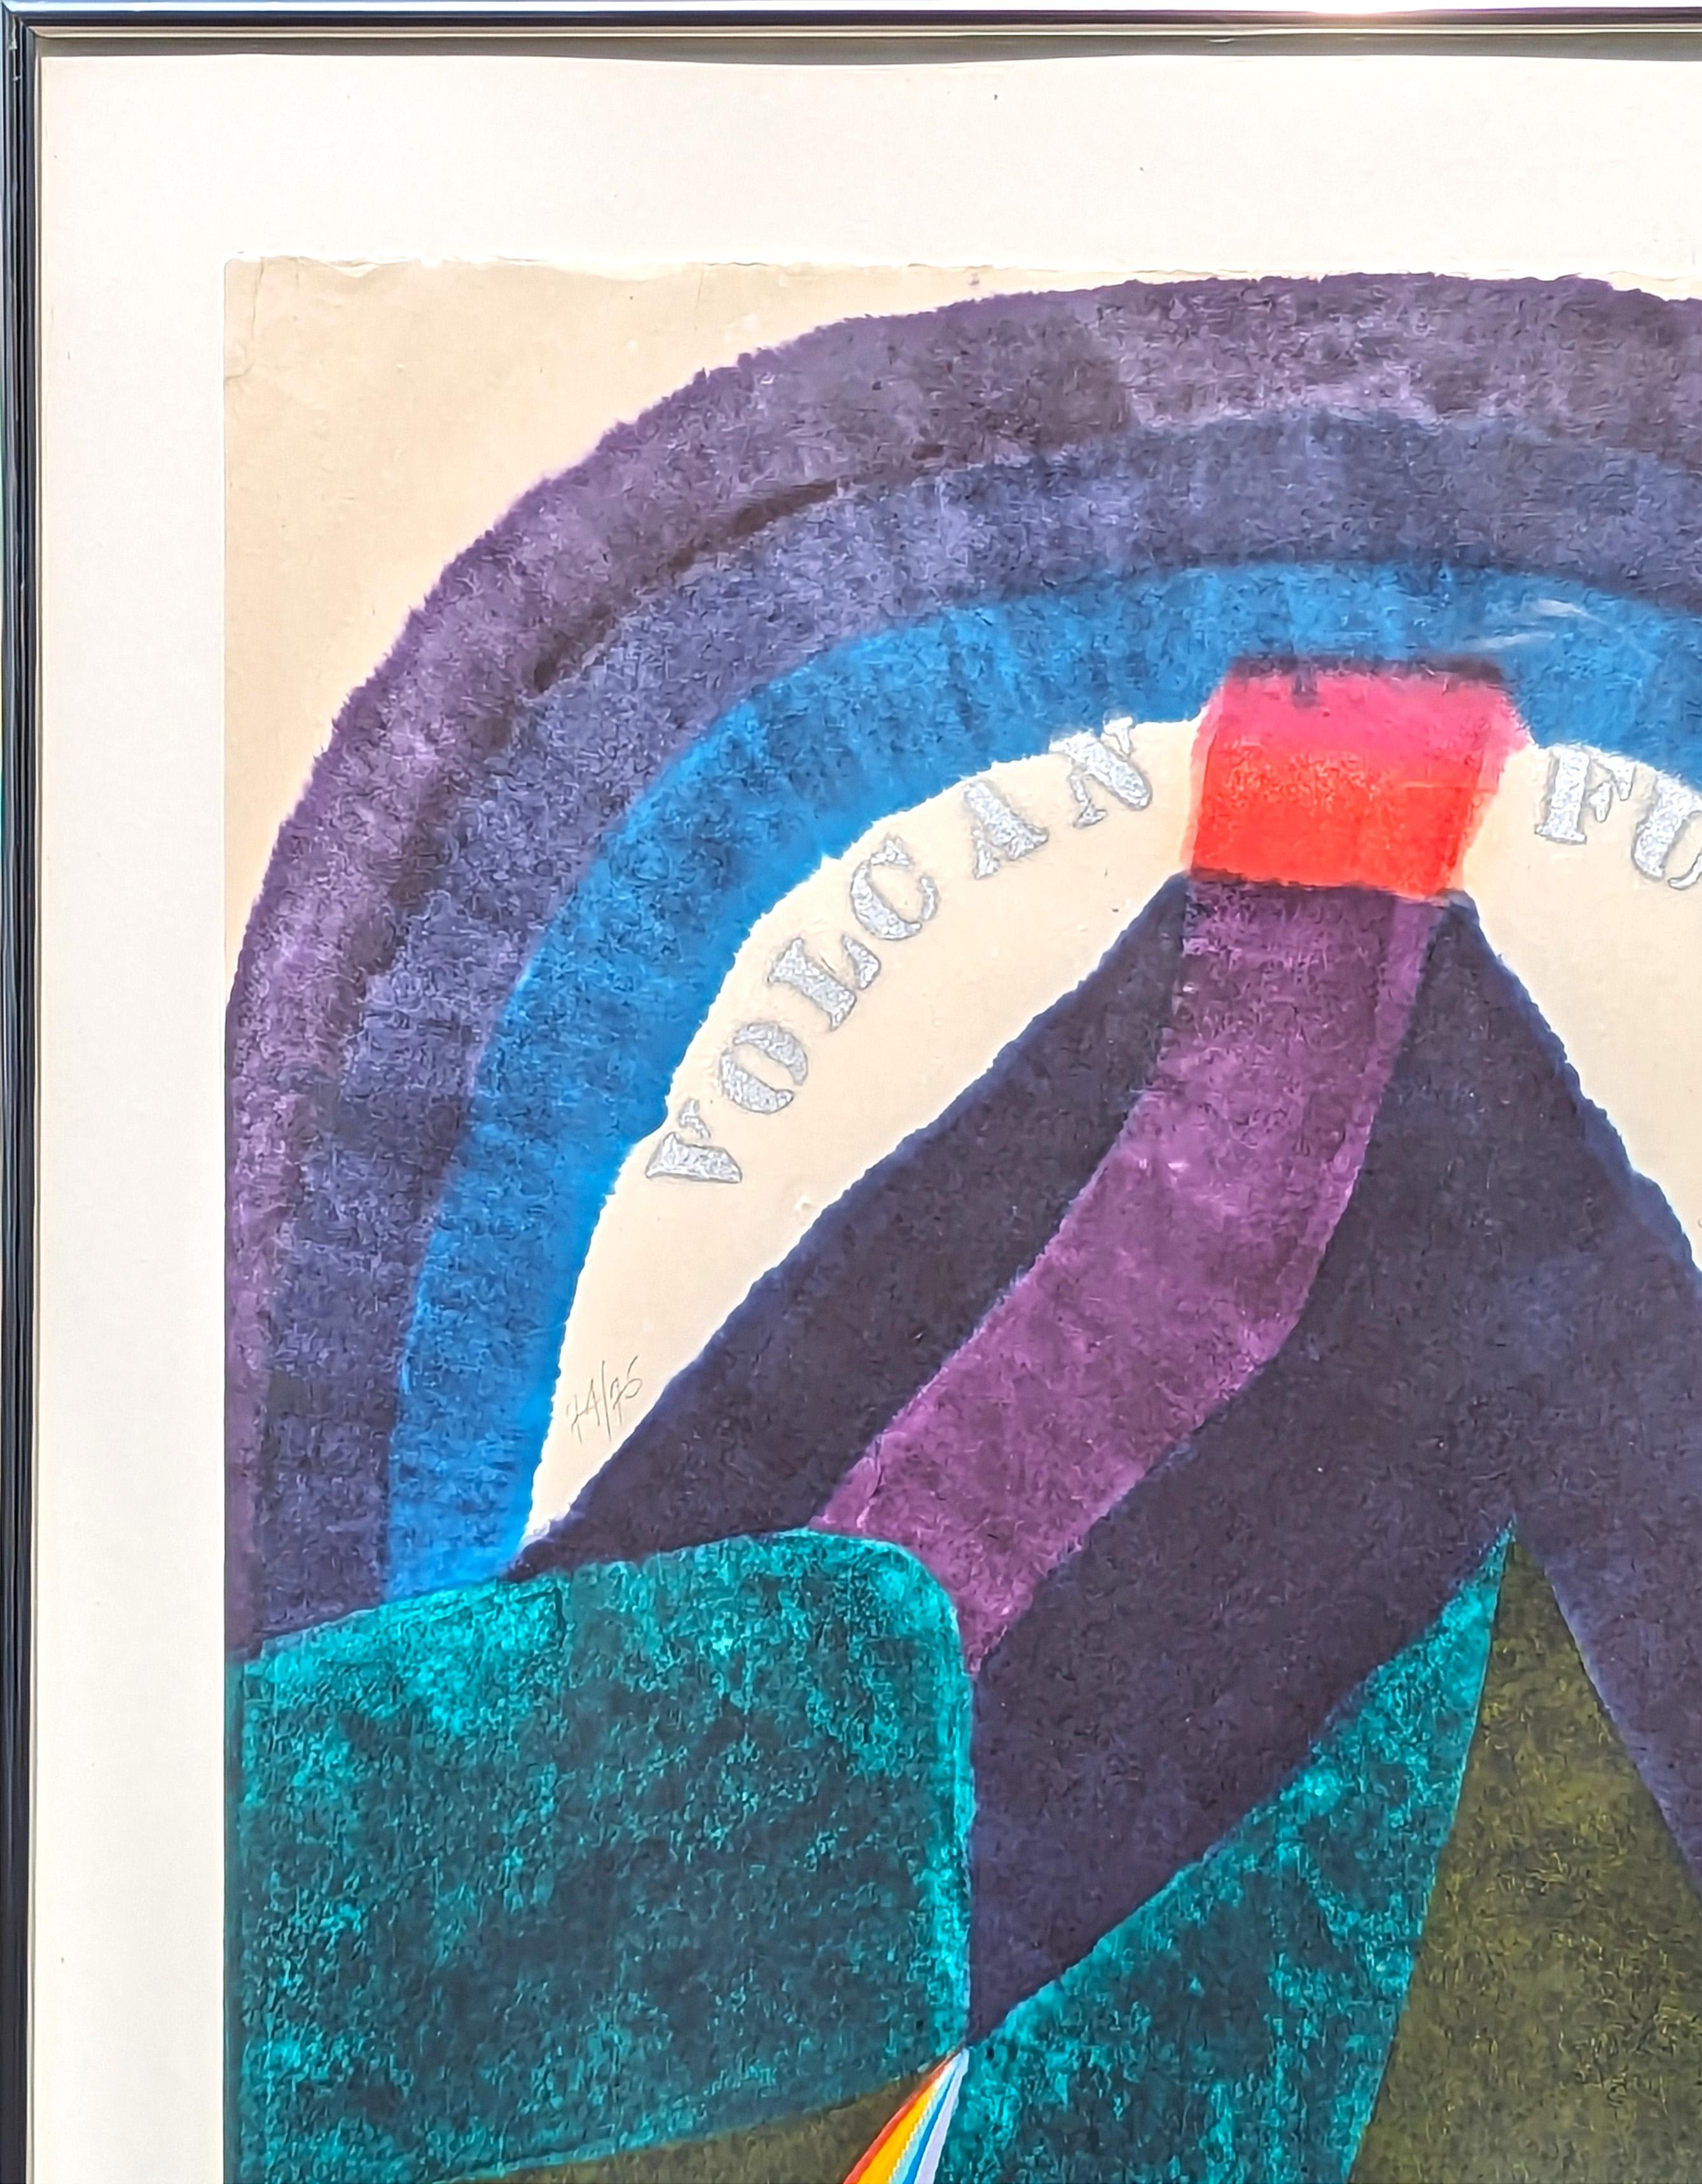 Colorful abstract landscape woodcut print by modern artist Carol Summers. The work features a color blocked depiction of a volcano with a rainbow. Signed, titled, and editioned within the work. Currently hung in a metallic silver floating frame.